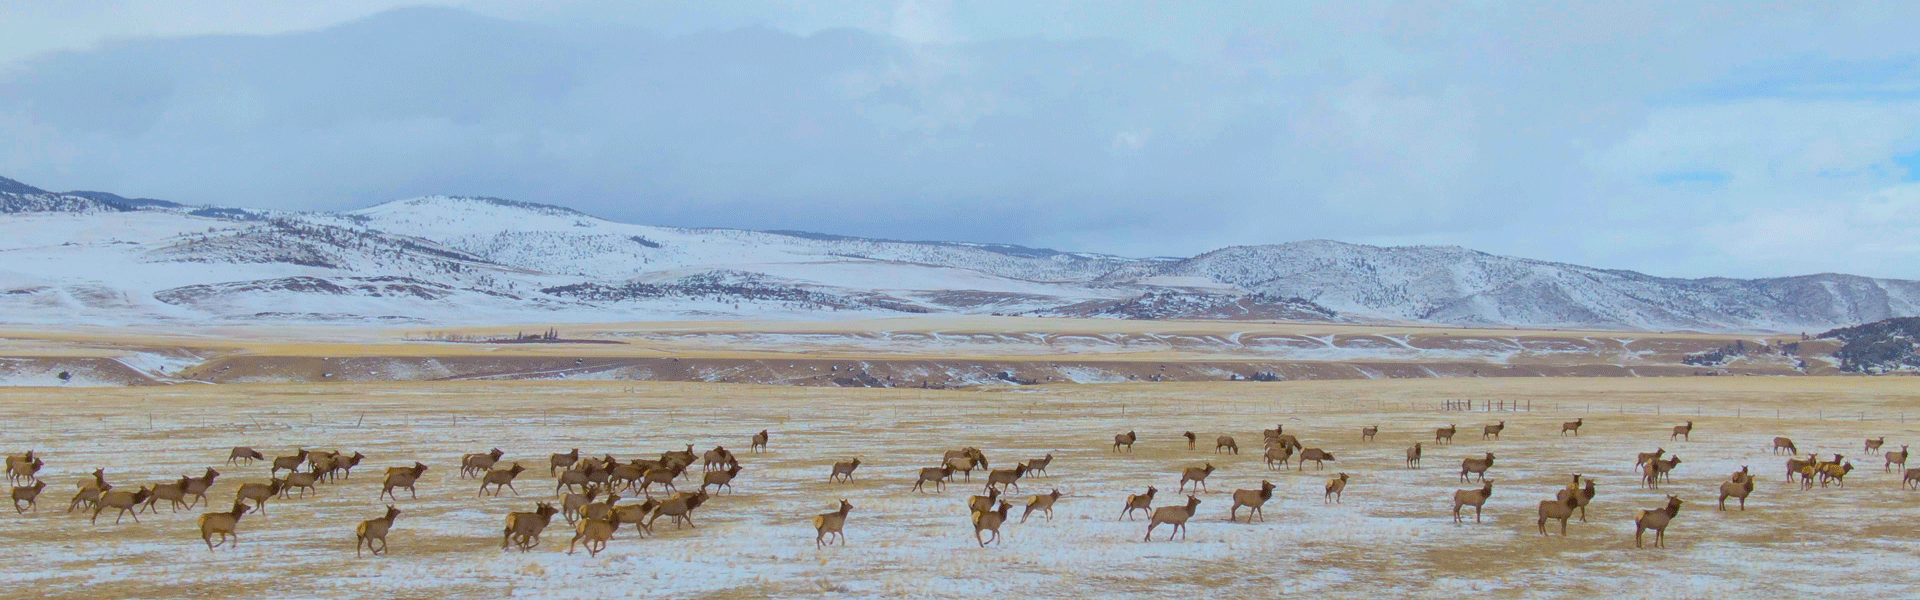 Herd of elk behind a fence on private land